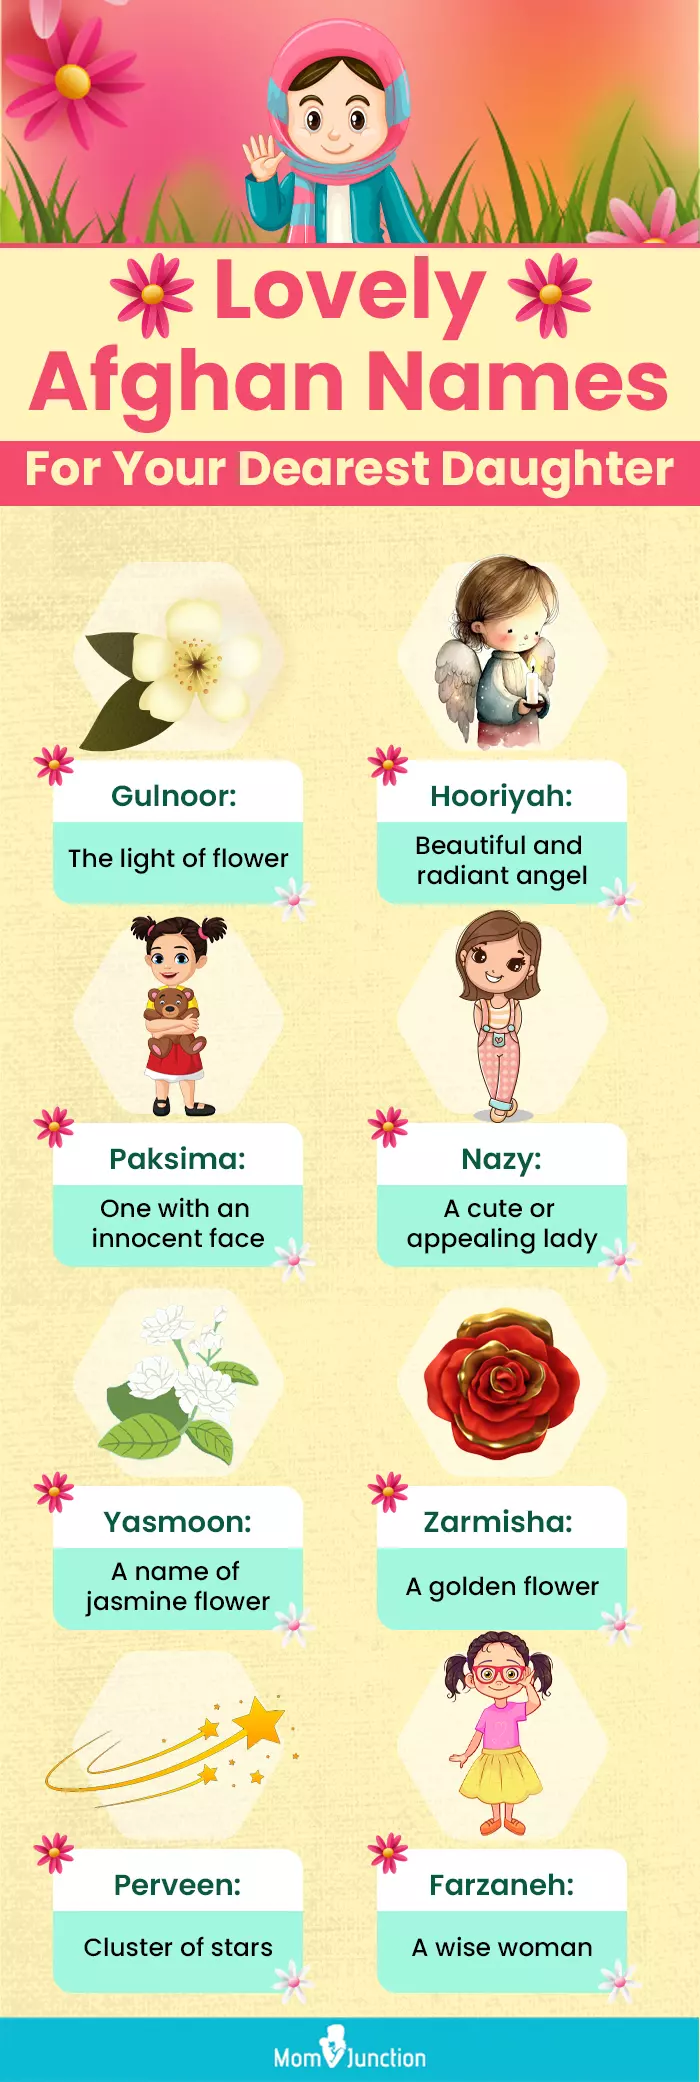 lovely afghan names for your dearest daughter (infographic)